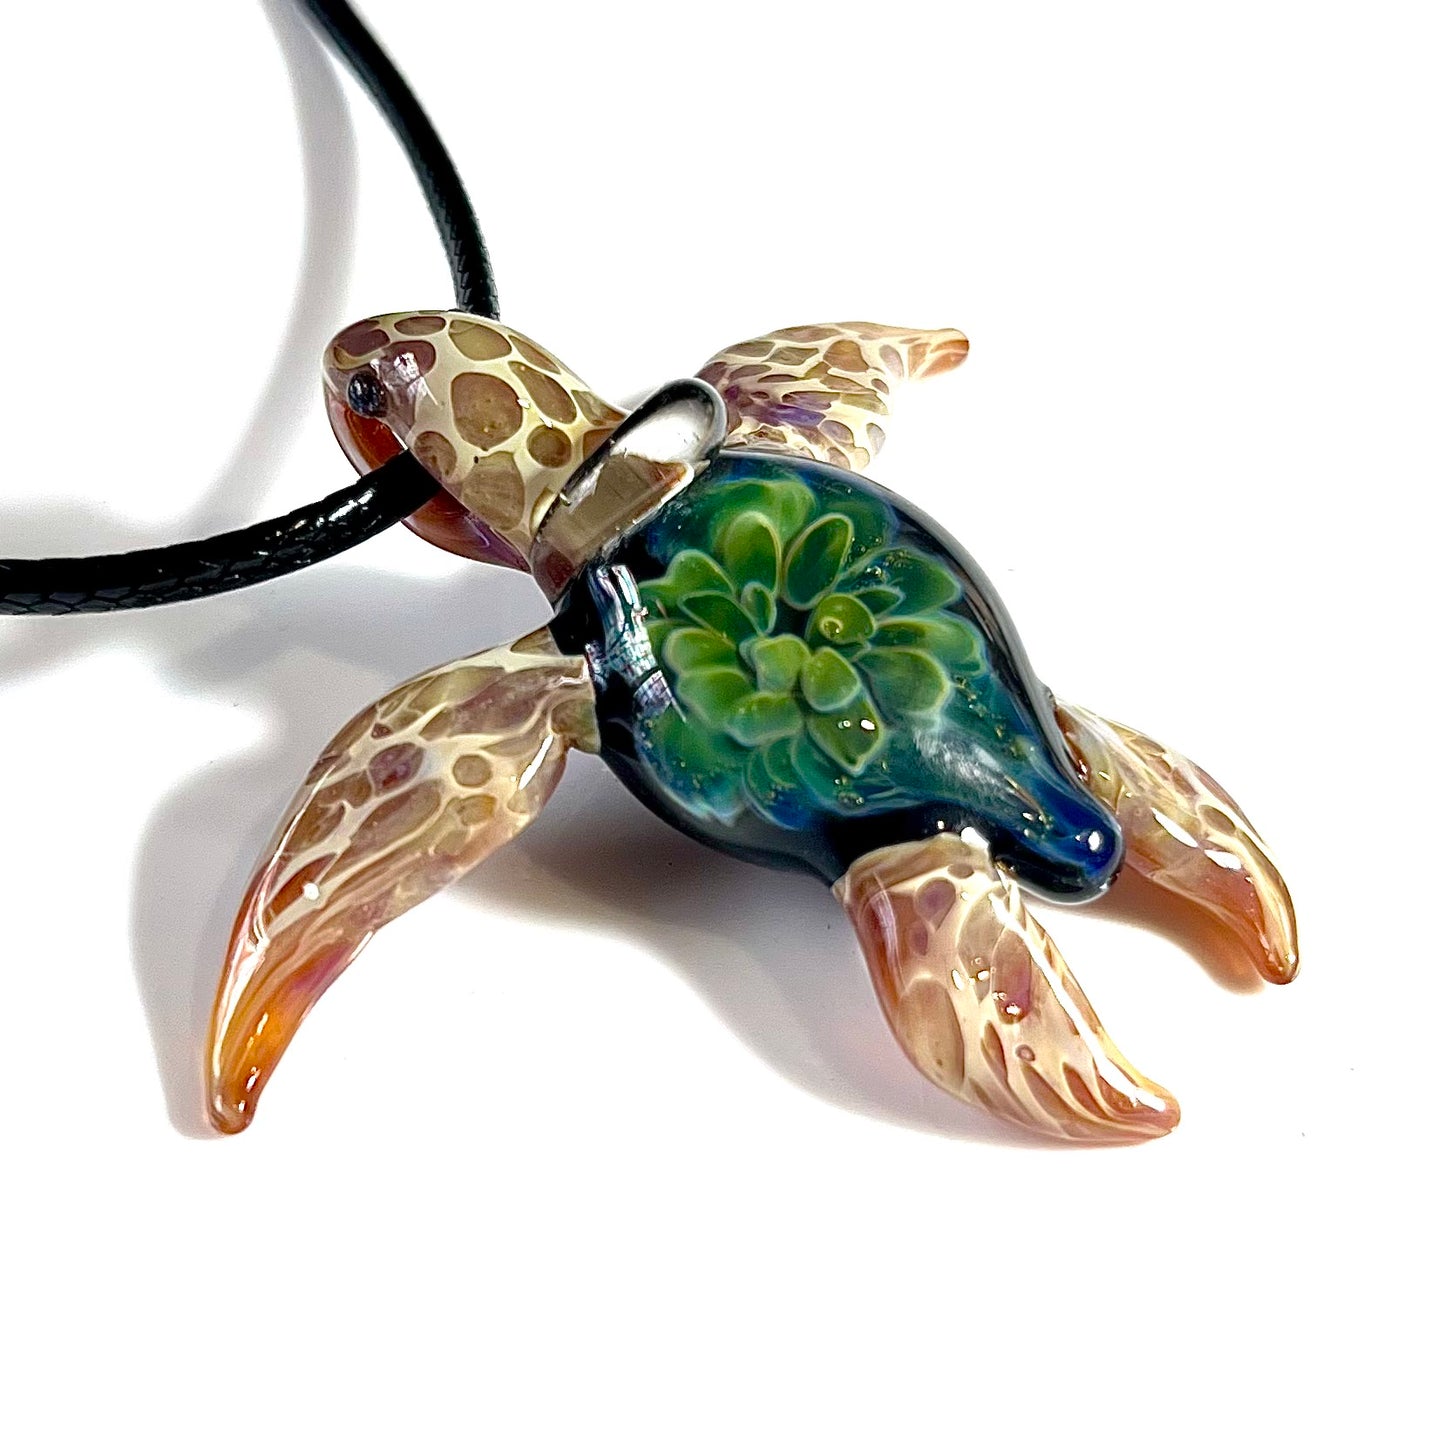 Exquisite Hawaiian Honu Sea Turtle: Handcrafted Glass Pendant with Coral Reef Inside the Shell - GLASSnFIRE